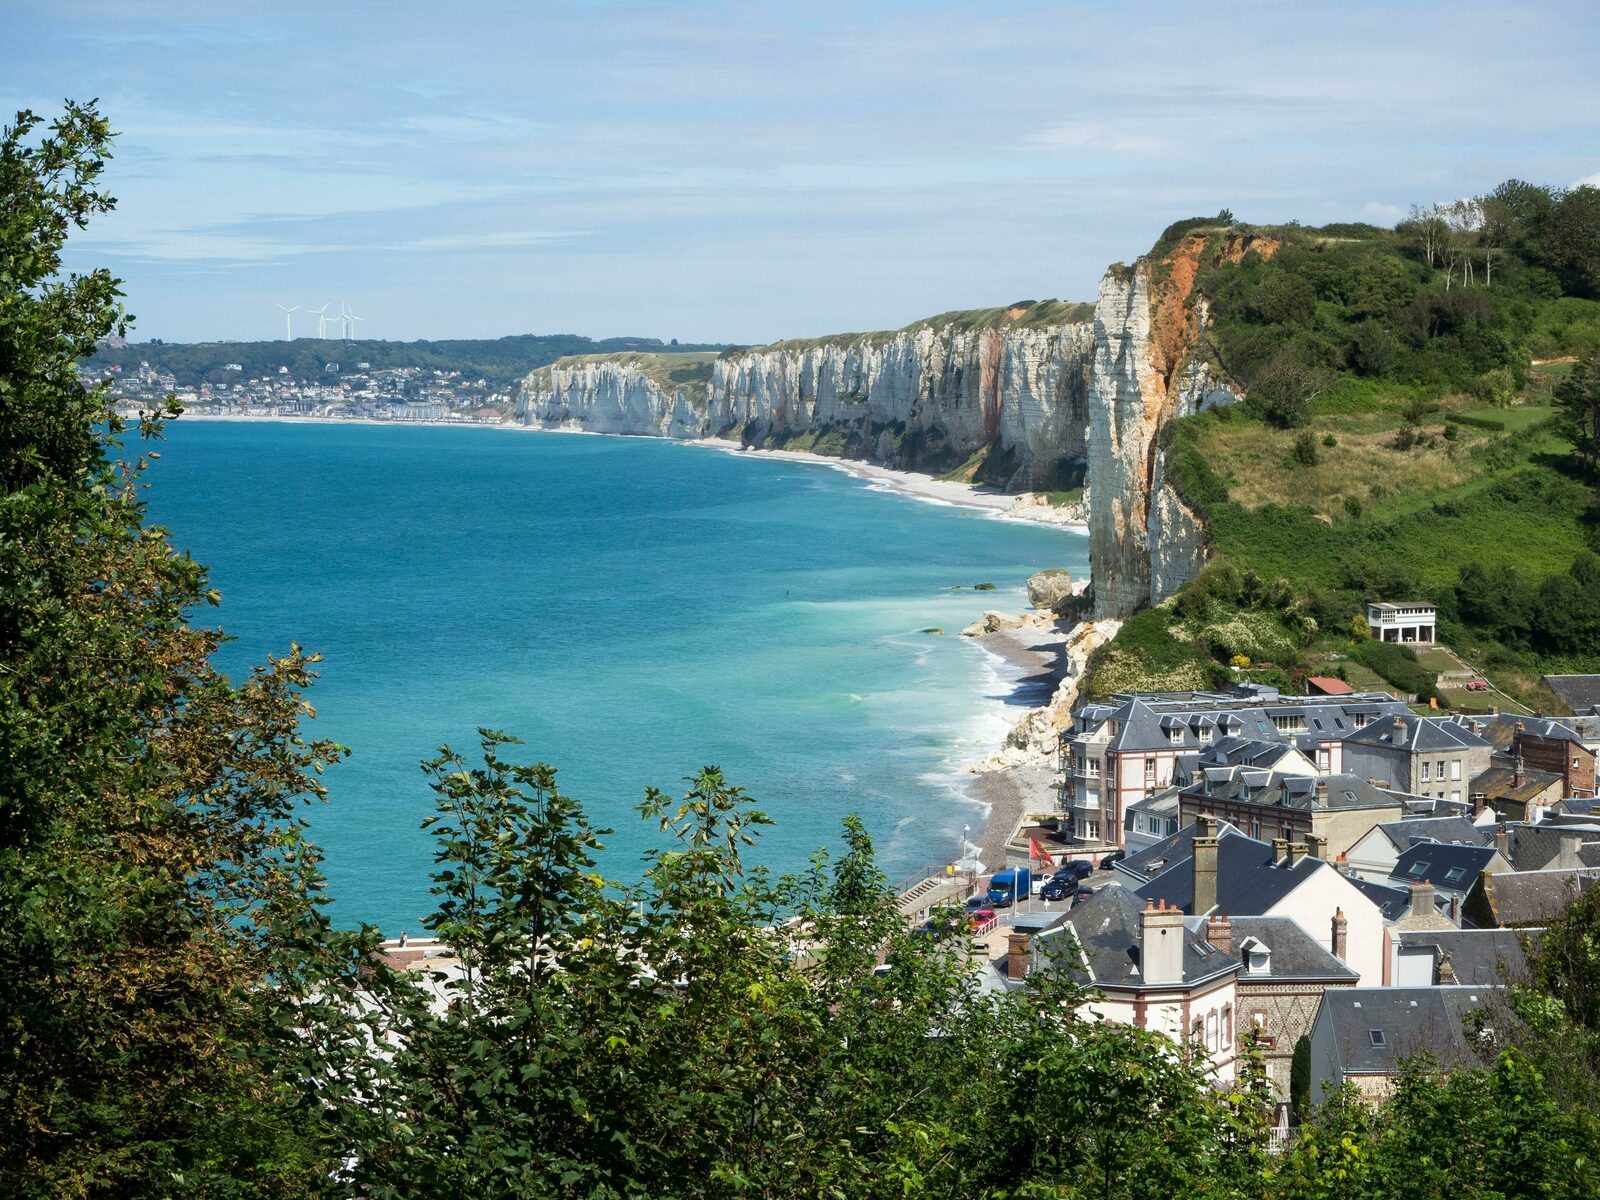 Northern france holiday destination - Normandy